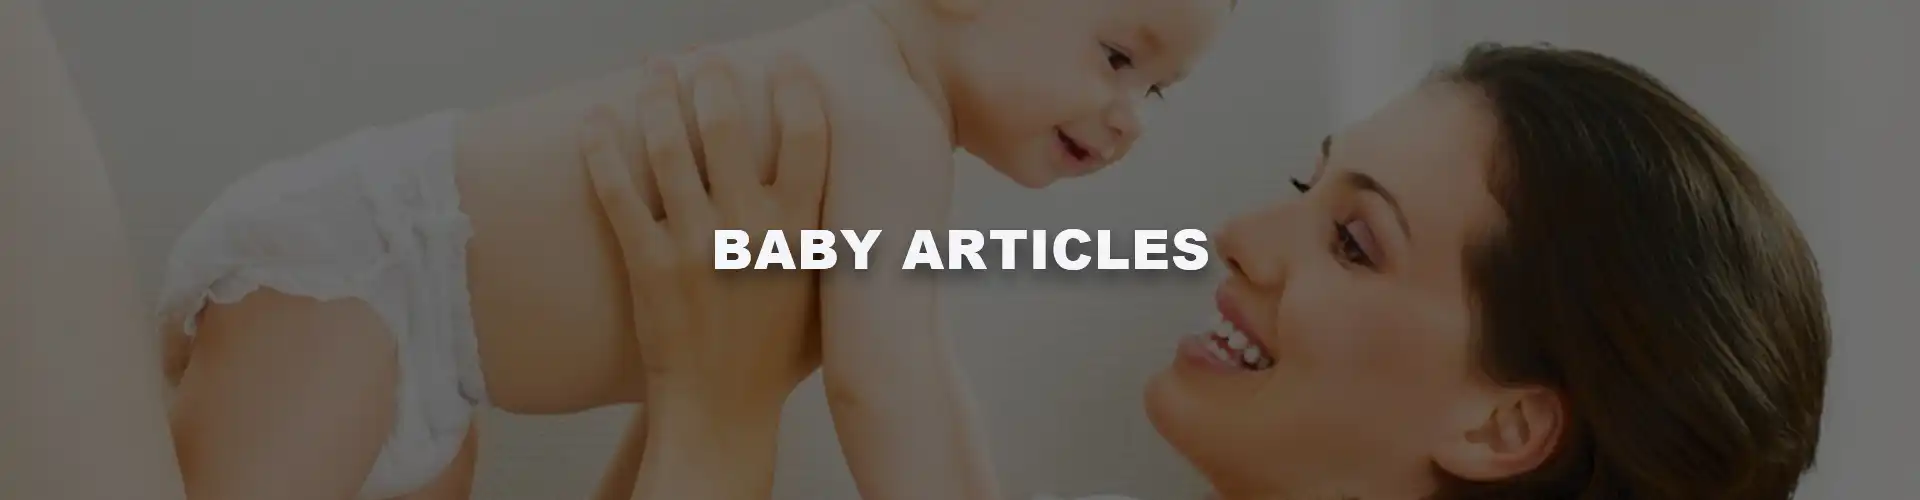 Baby Articles